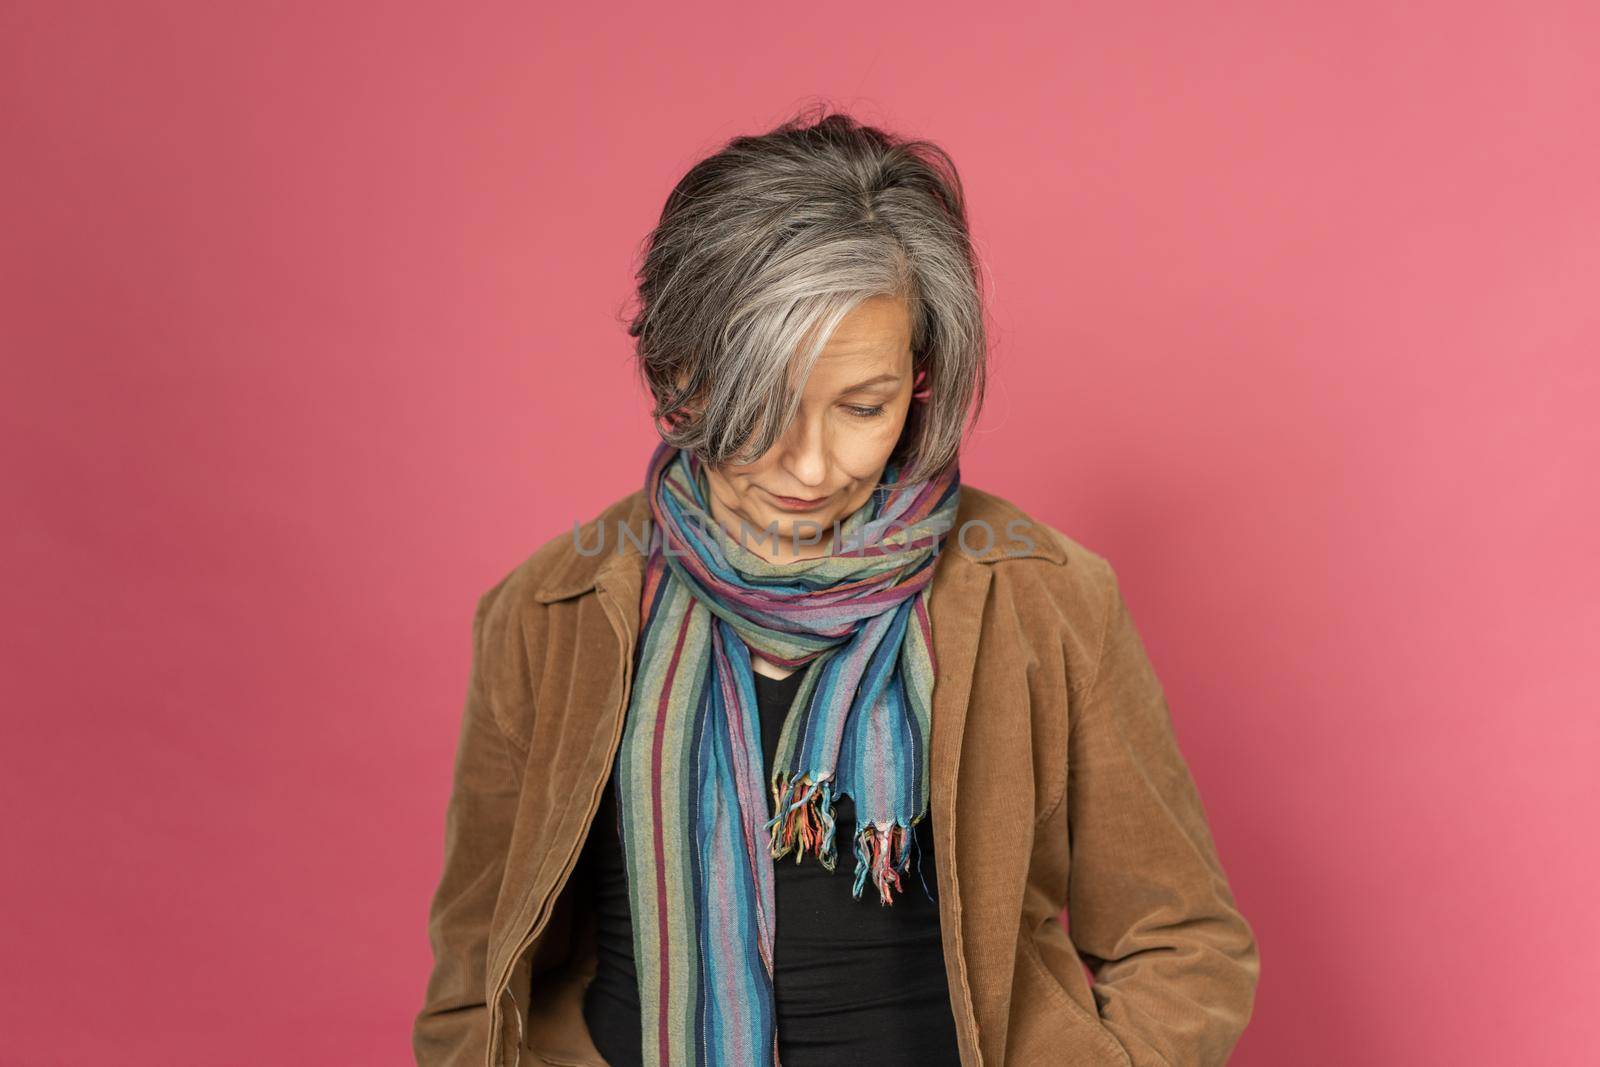 Pensive grey haired woman looks down posing in studio on pink background. Lonely concept.